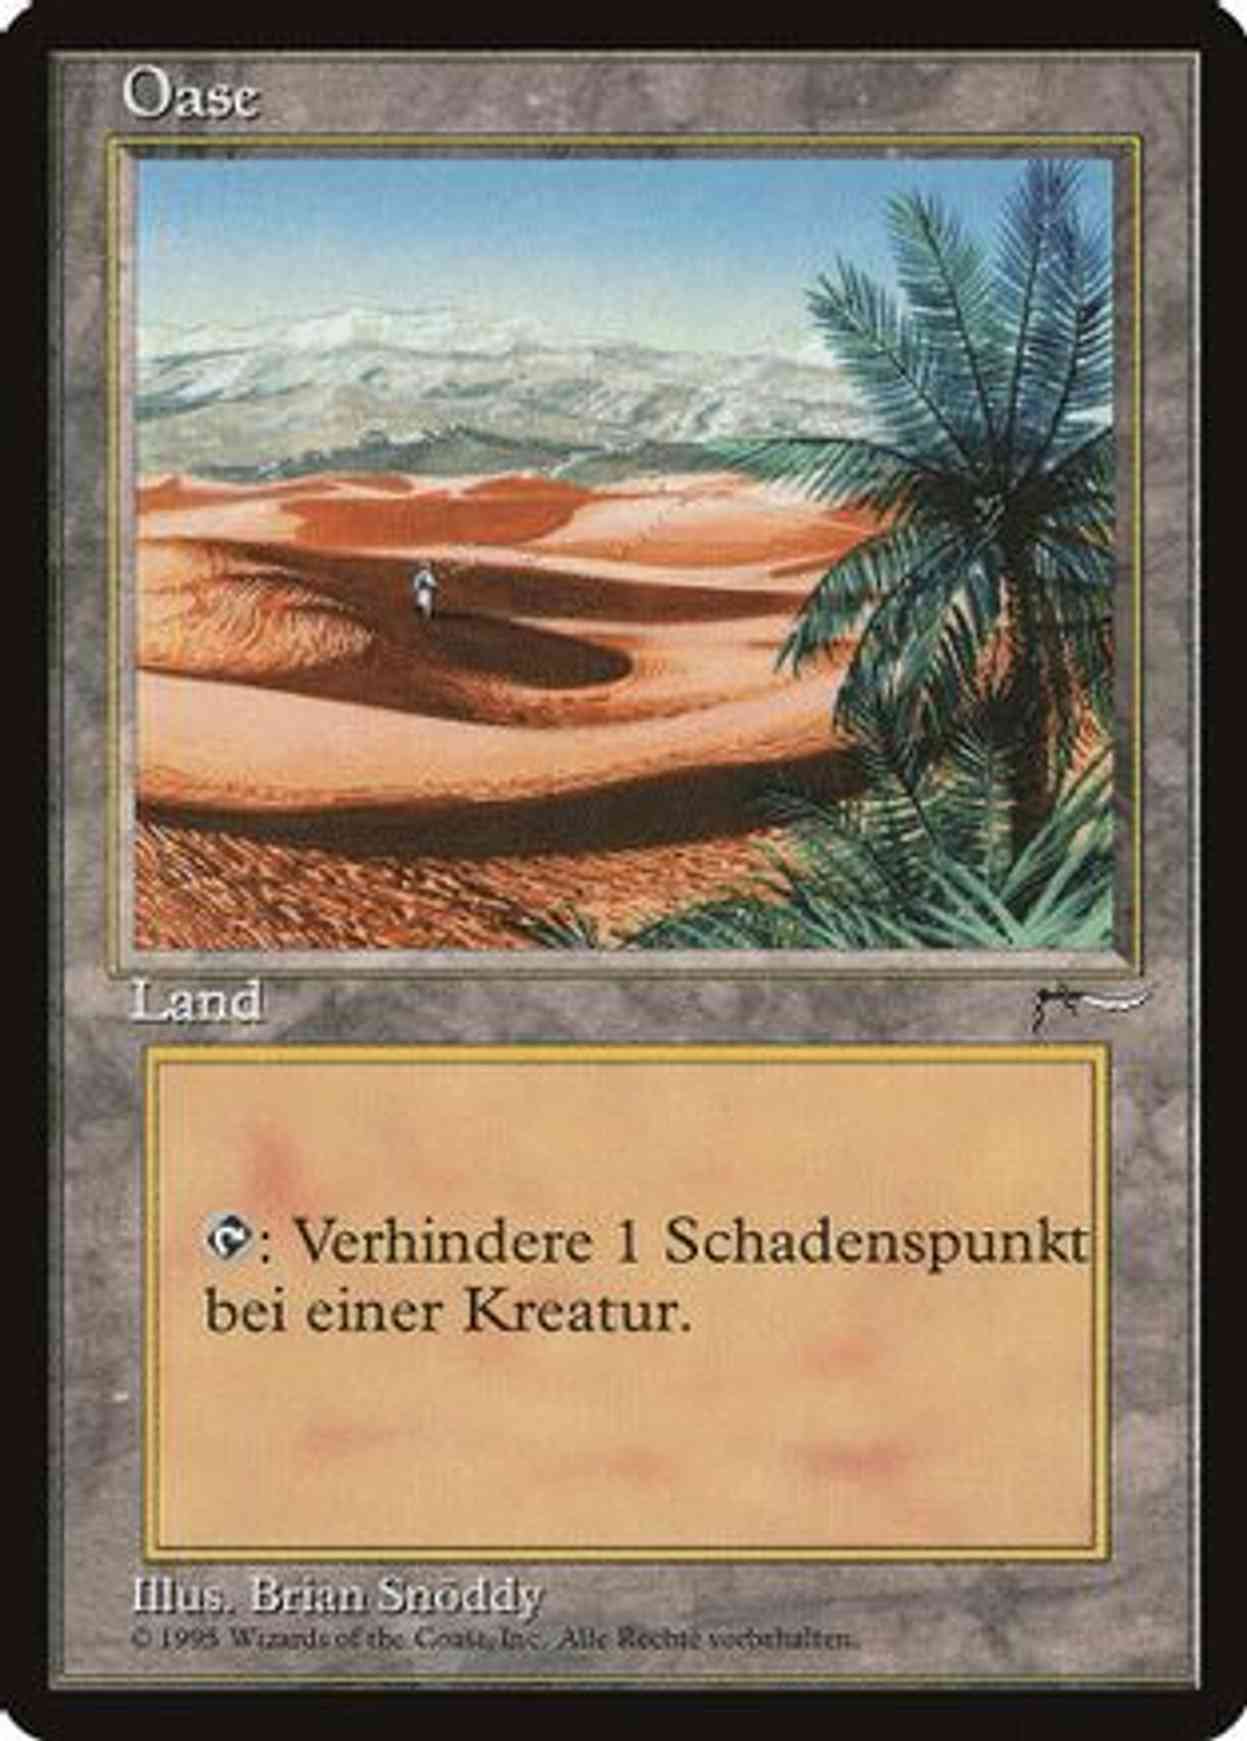 Oasis (German) - "Oase" magic card front